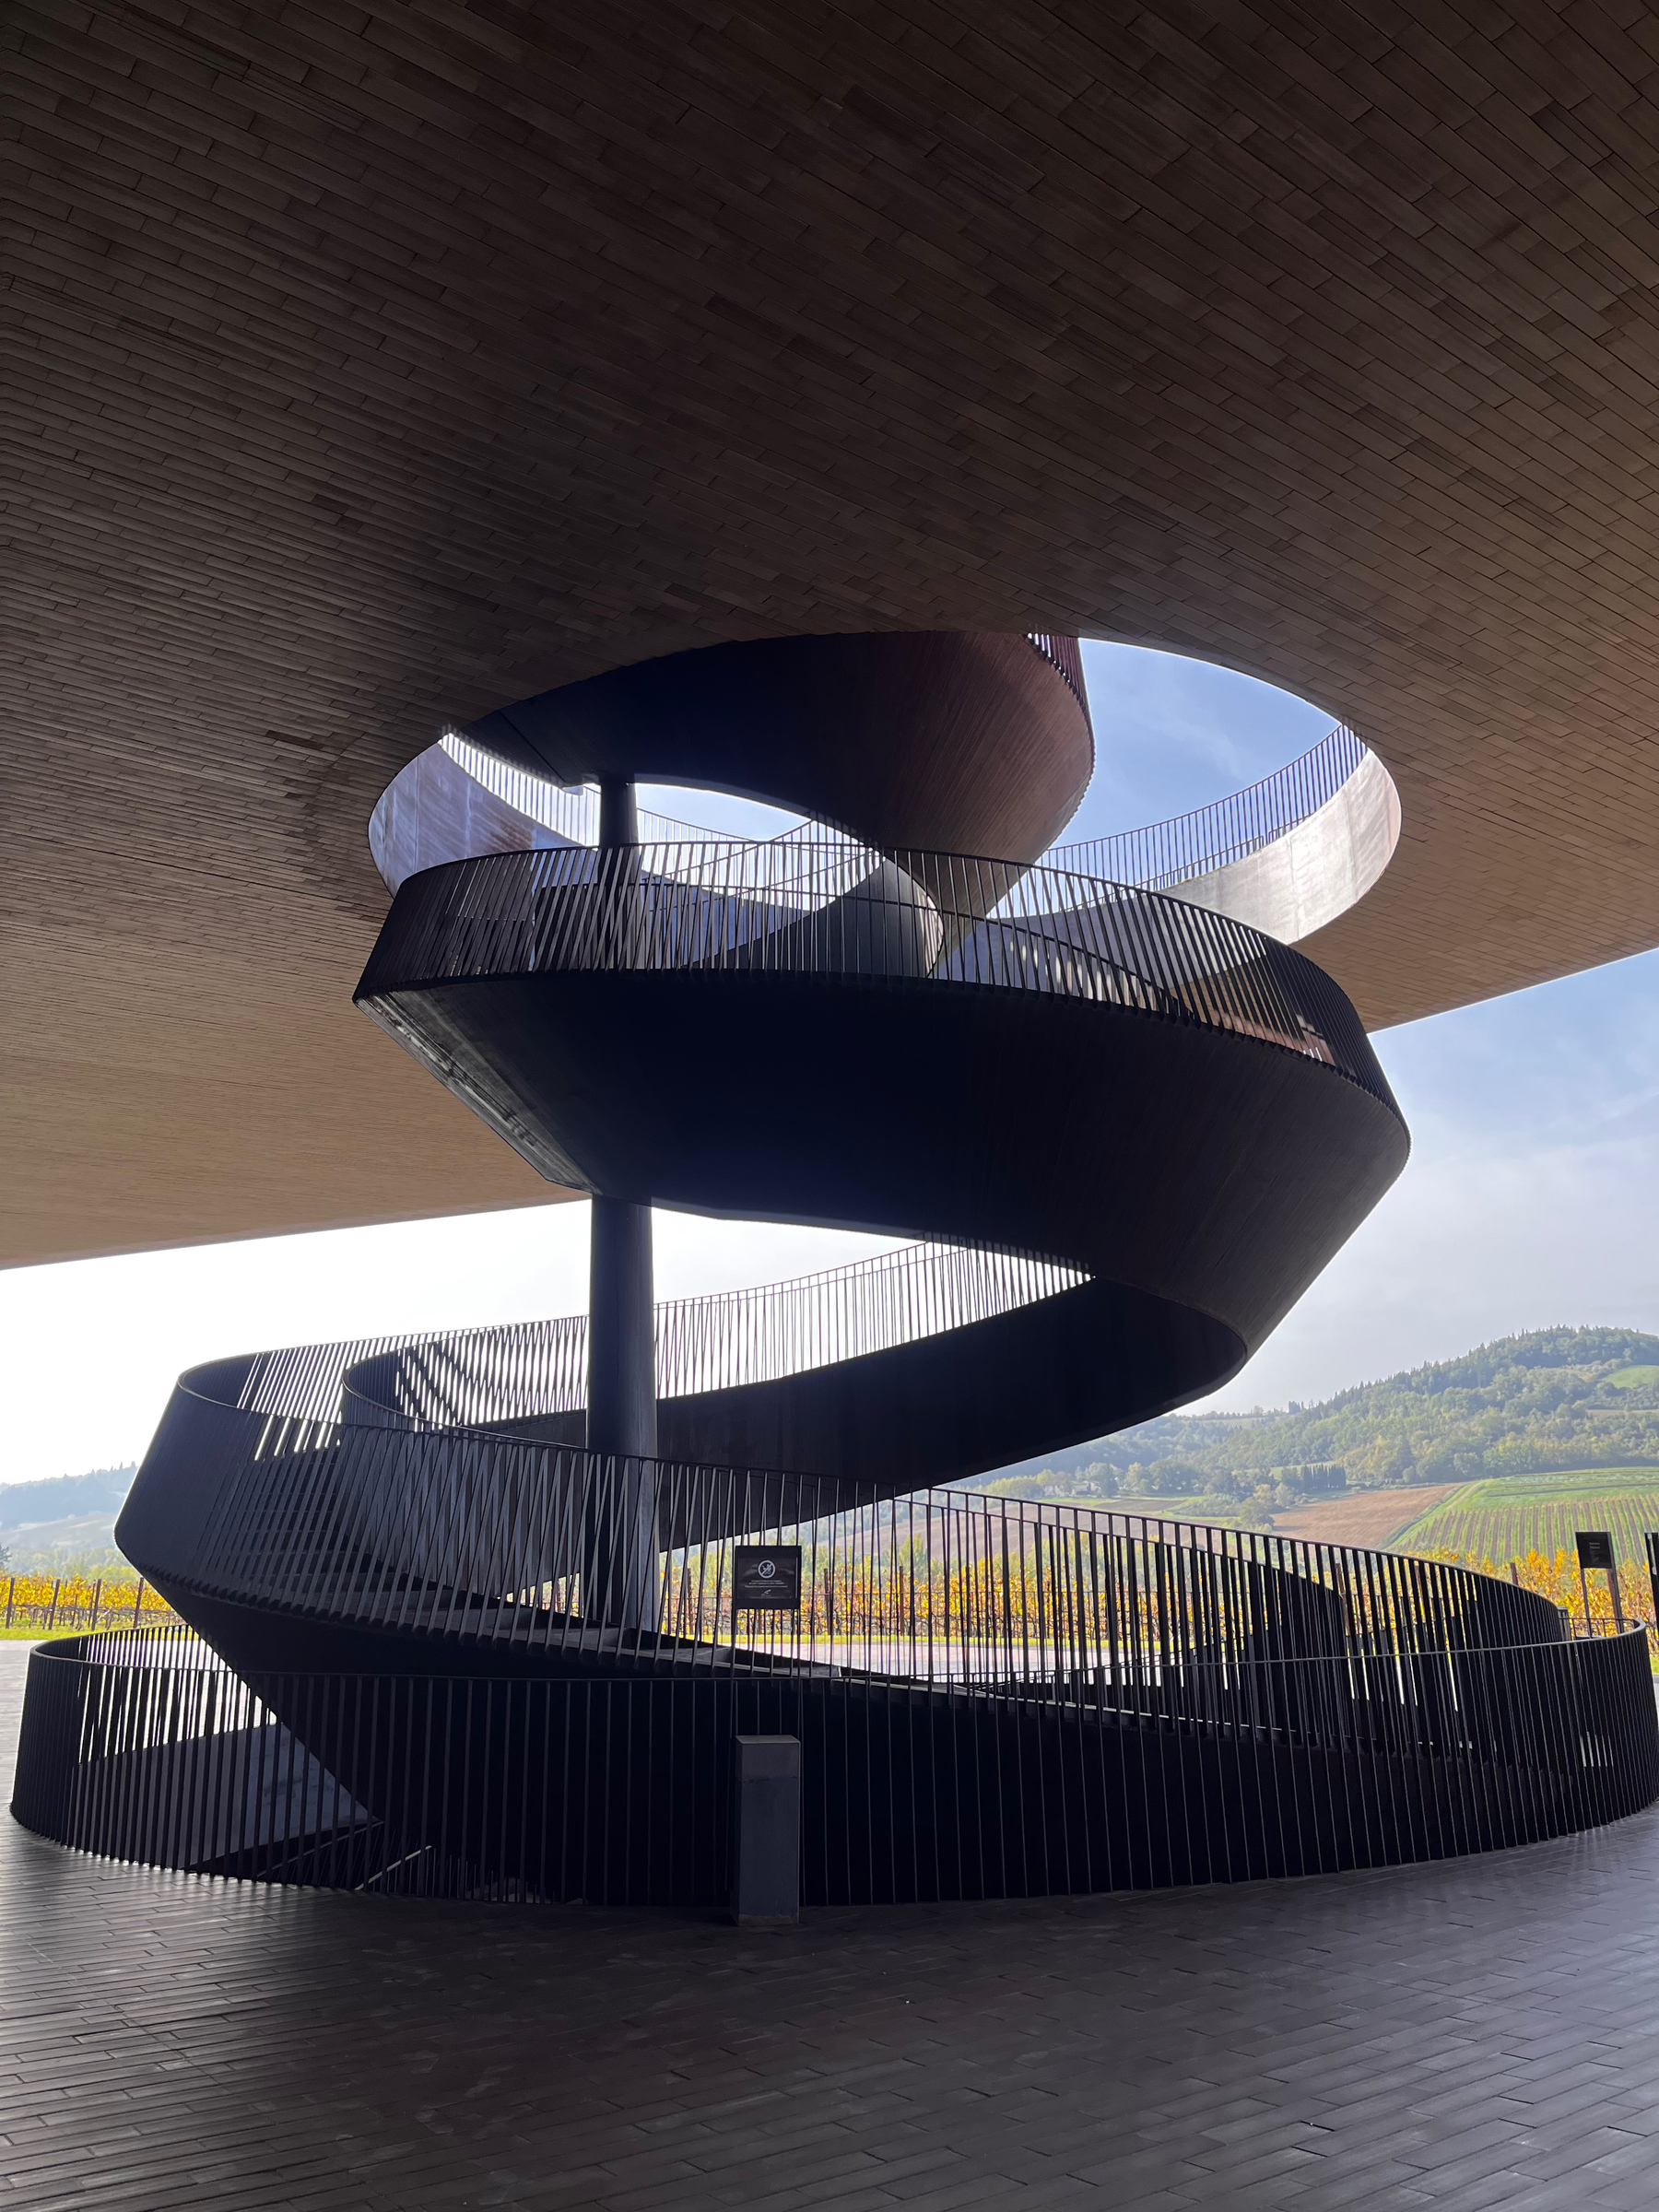 A spiral staircase winding its way up through the floors, outside at Antinori nel Chianti Classico, a winery in Tuscany, Italy